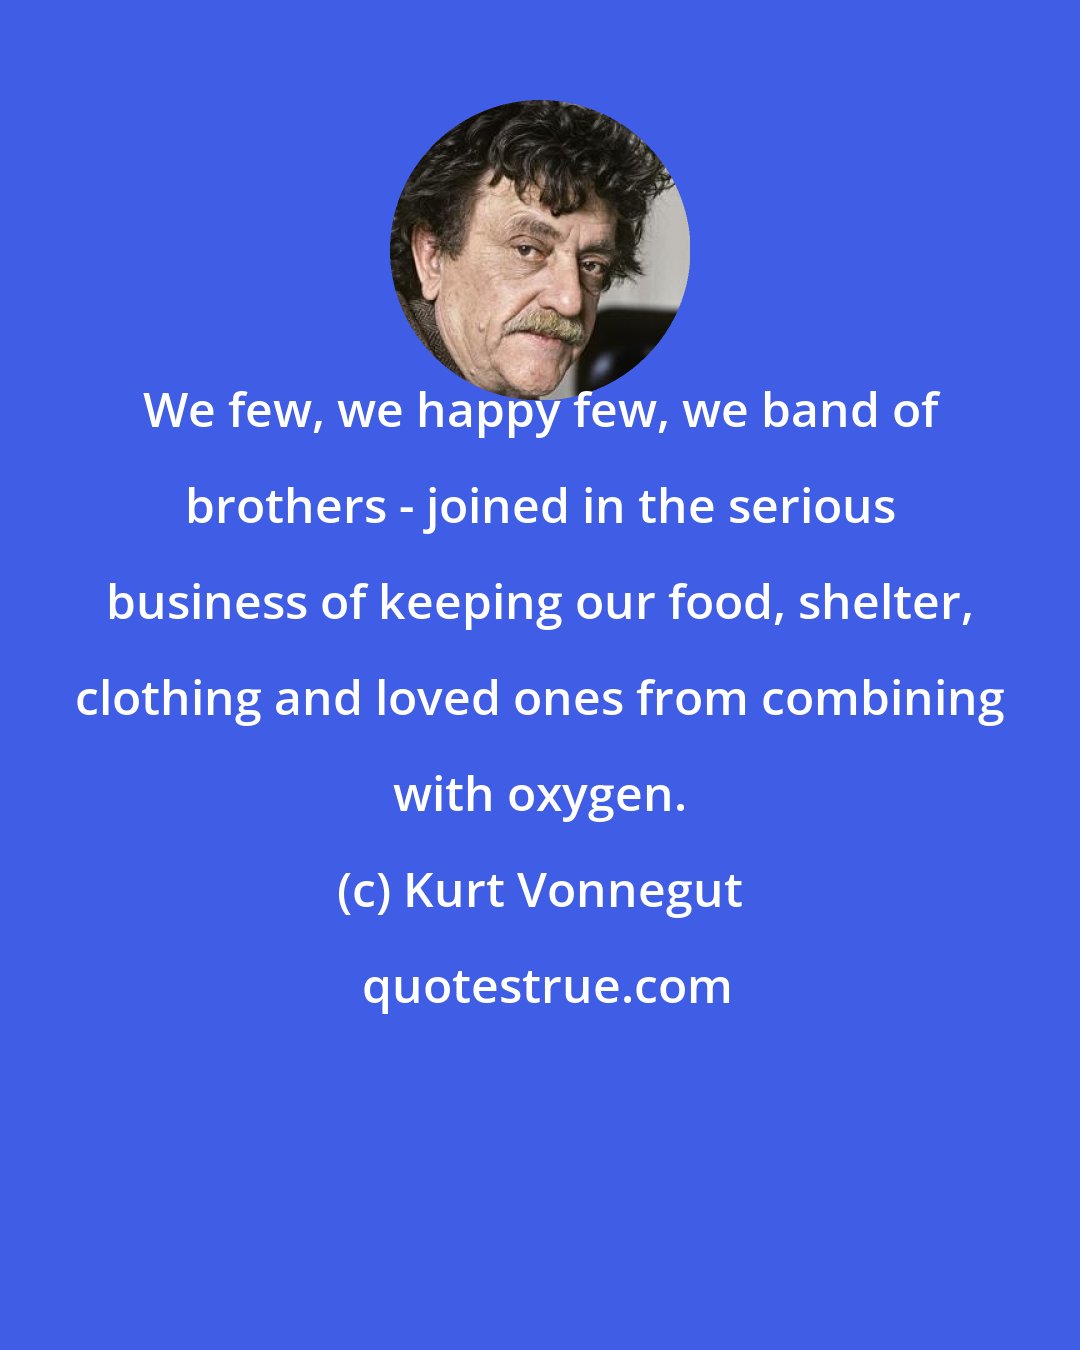 Kurt Vonnegut: We few, we happy few, we band of brothers - joined in the serious business of keeping our food, shelter, clothing and loved ones from combining with oxygen.